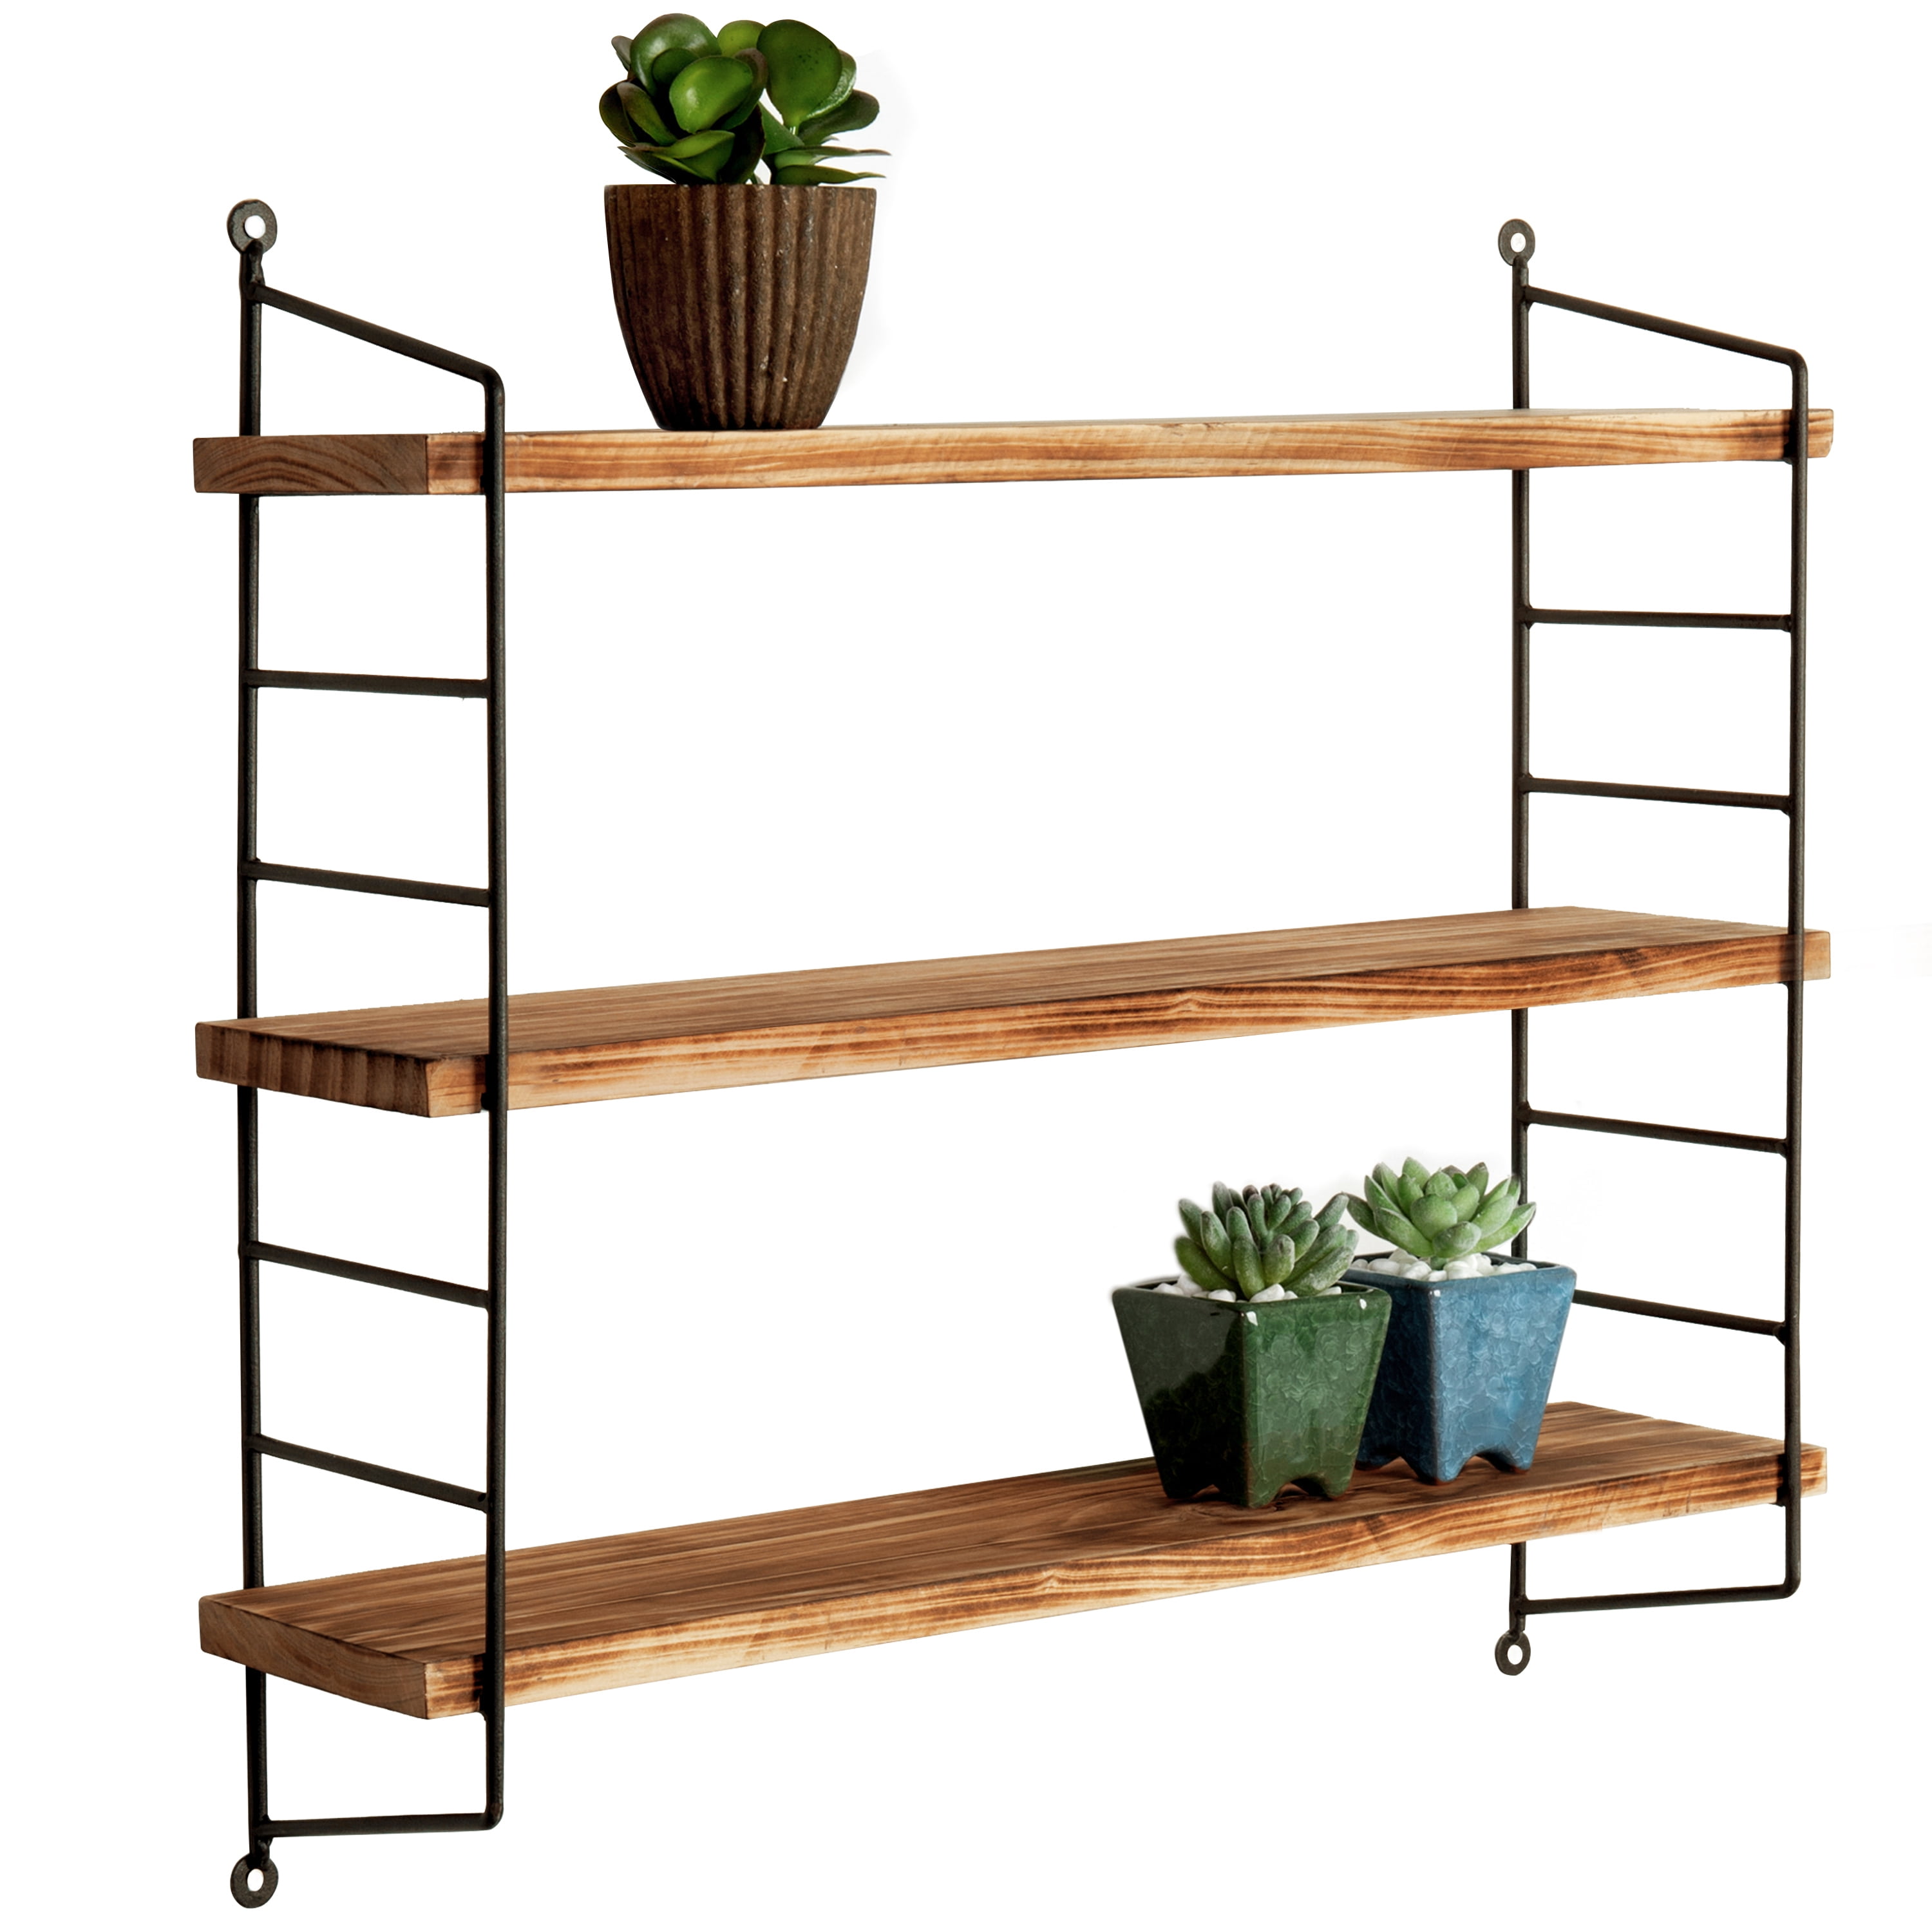 Wall Mounted Units And Shelves In Modern Design